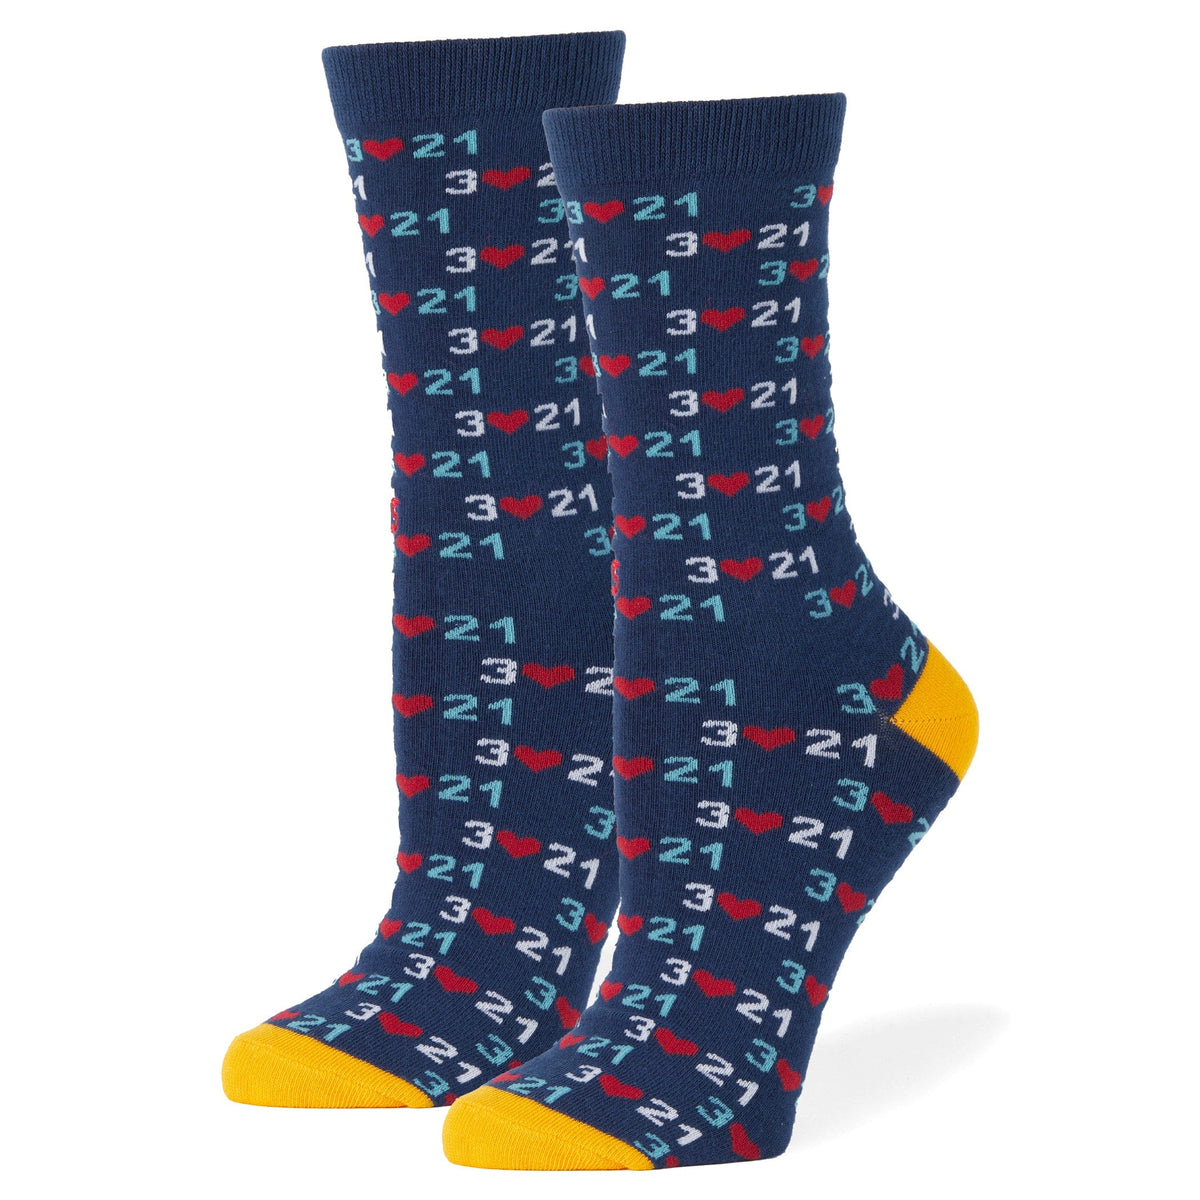 Down Syndrome Awareness Knit Crew Sock Blue